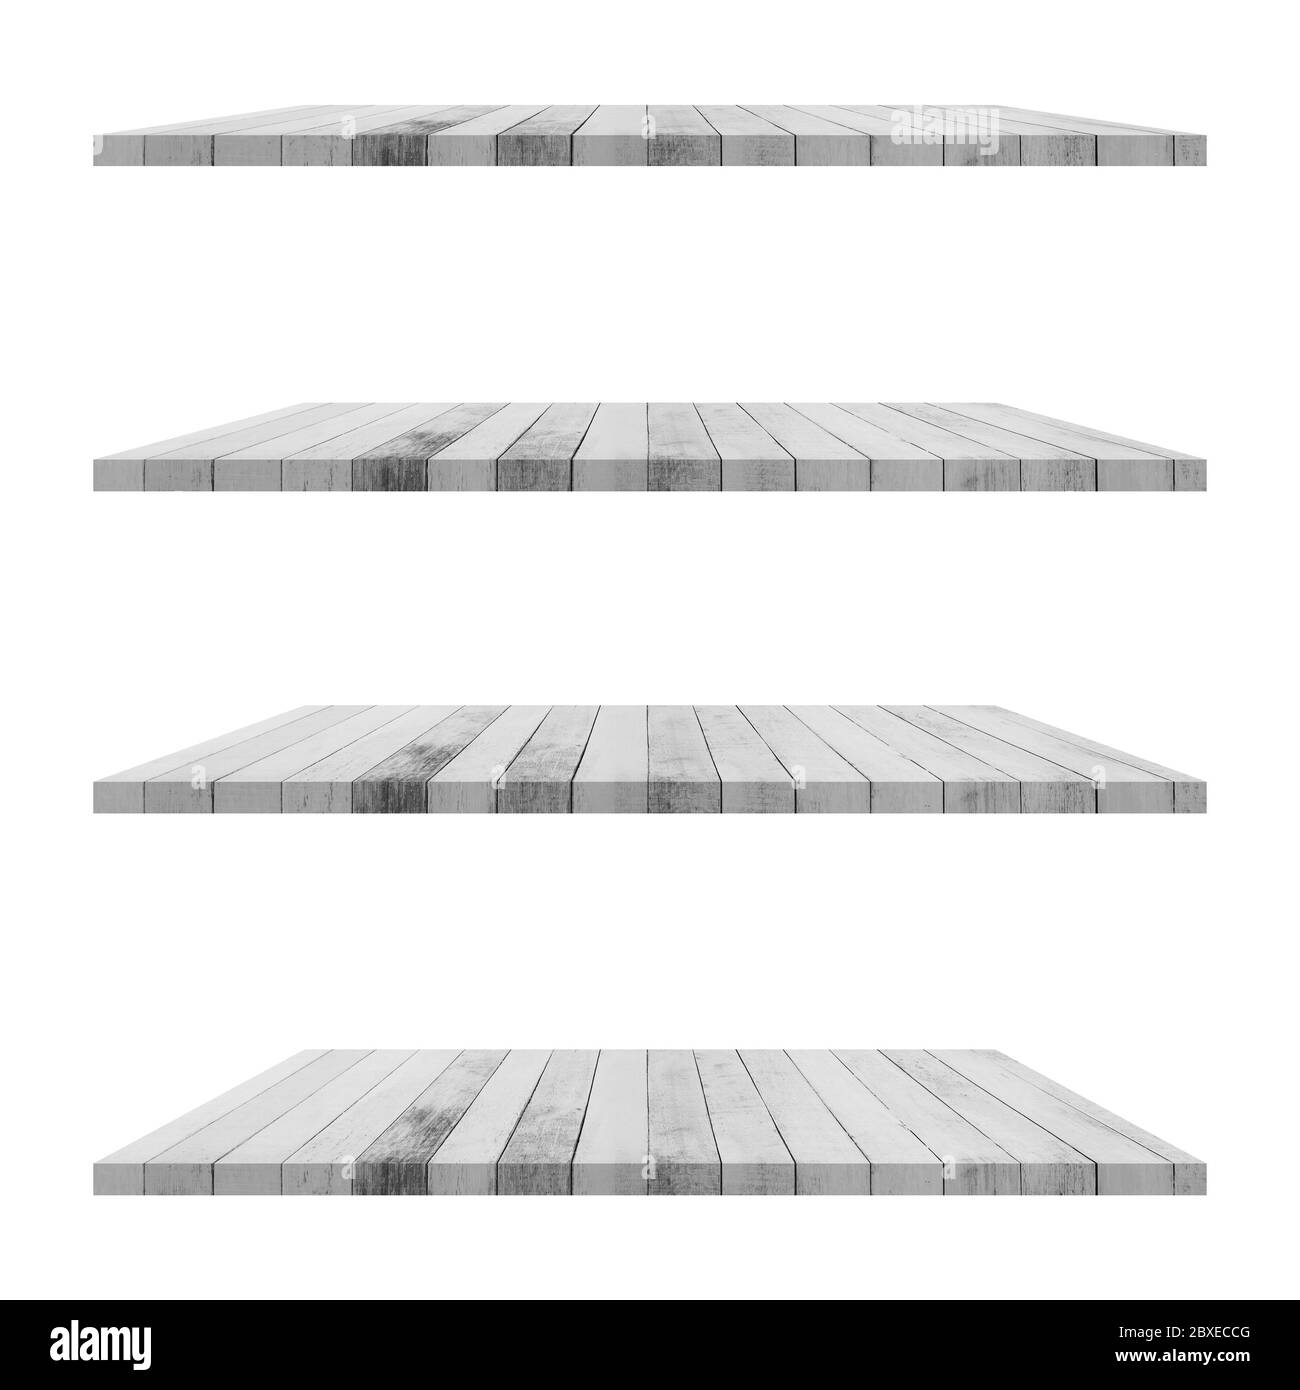 4 Wood shelves table isolated on white background and display montage for product. Stock Photo